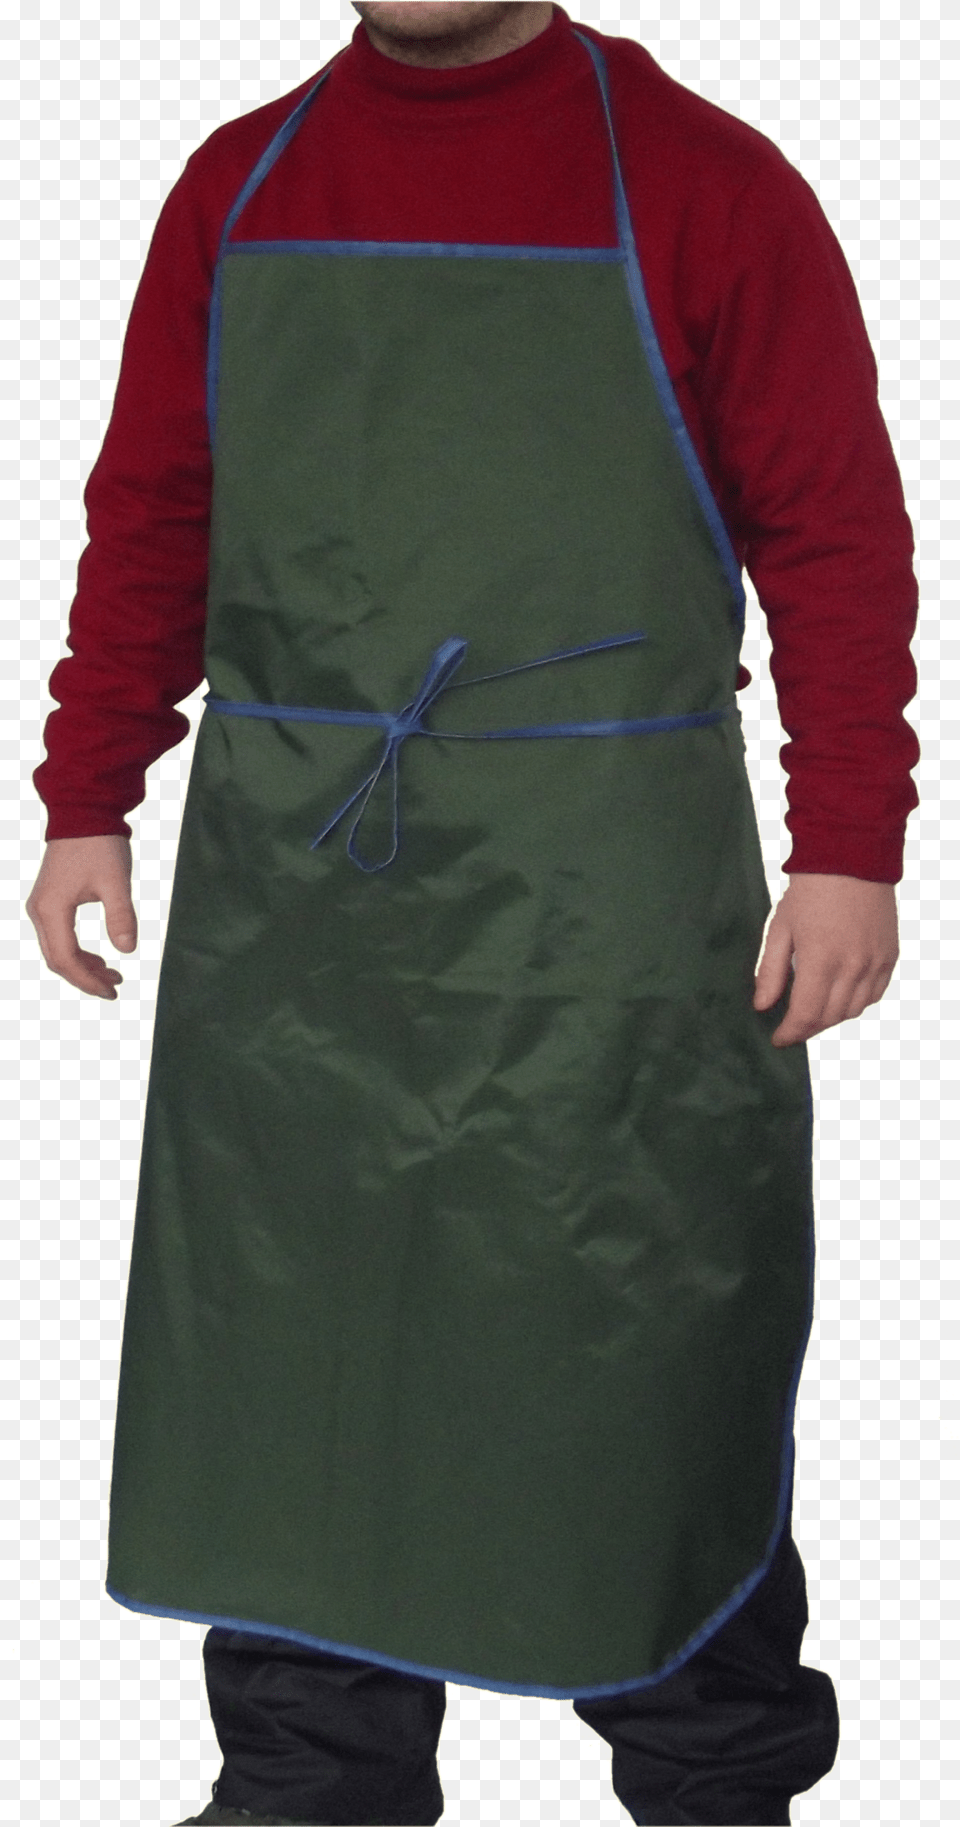 Apron, Adult, Clothing, Male, Man Png